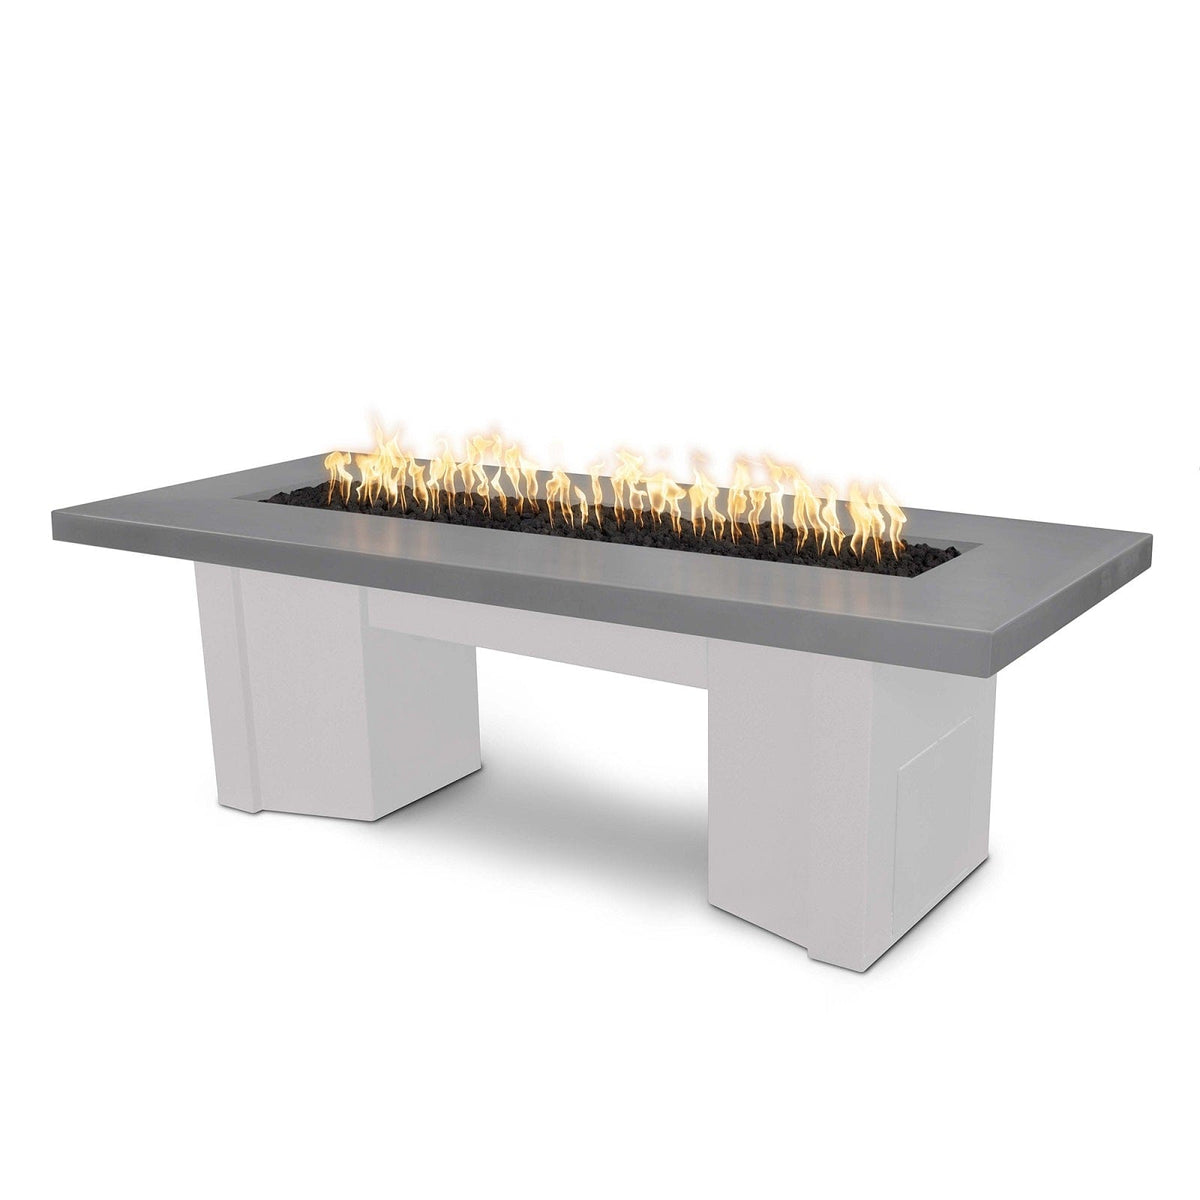 The Outdoor Plus Fire Features Natural Gray (-NGY) / White Powder Coated Steel (-WHT) The Outdoor Plus 60&quot; Alameda Fire Table Smooth Concrete in Liquid Propane - Flame Sense System with Push Button Spark Igniter / OPT-ALMGFRC60FSEN-LP